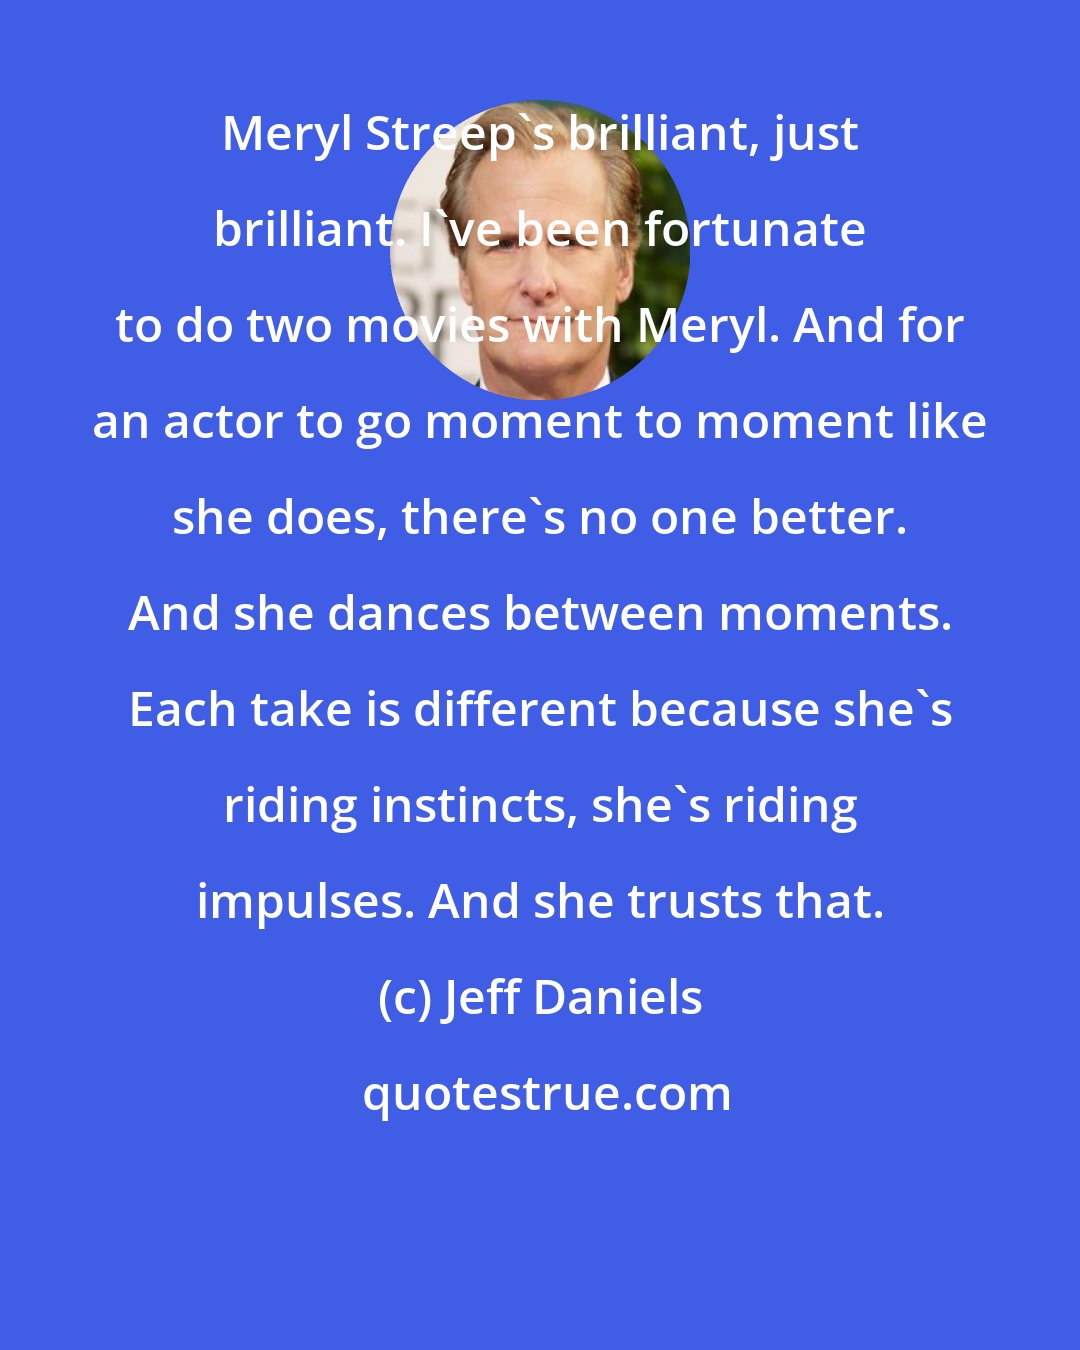 Jeff Daniels: Meryl Streep's brilliant, just brilliant. I've been fortunate to do two movies with Meryl. And for an actor to go moment to moment like she does, there's no one better. And she dances between moments. Each take is different because she's riding instincts, she's riding impulses. And she trusts that.